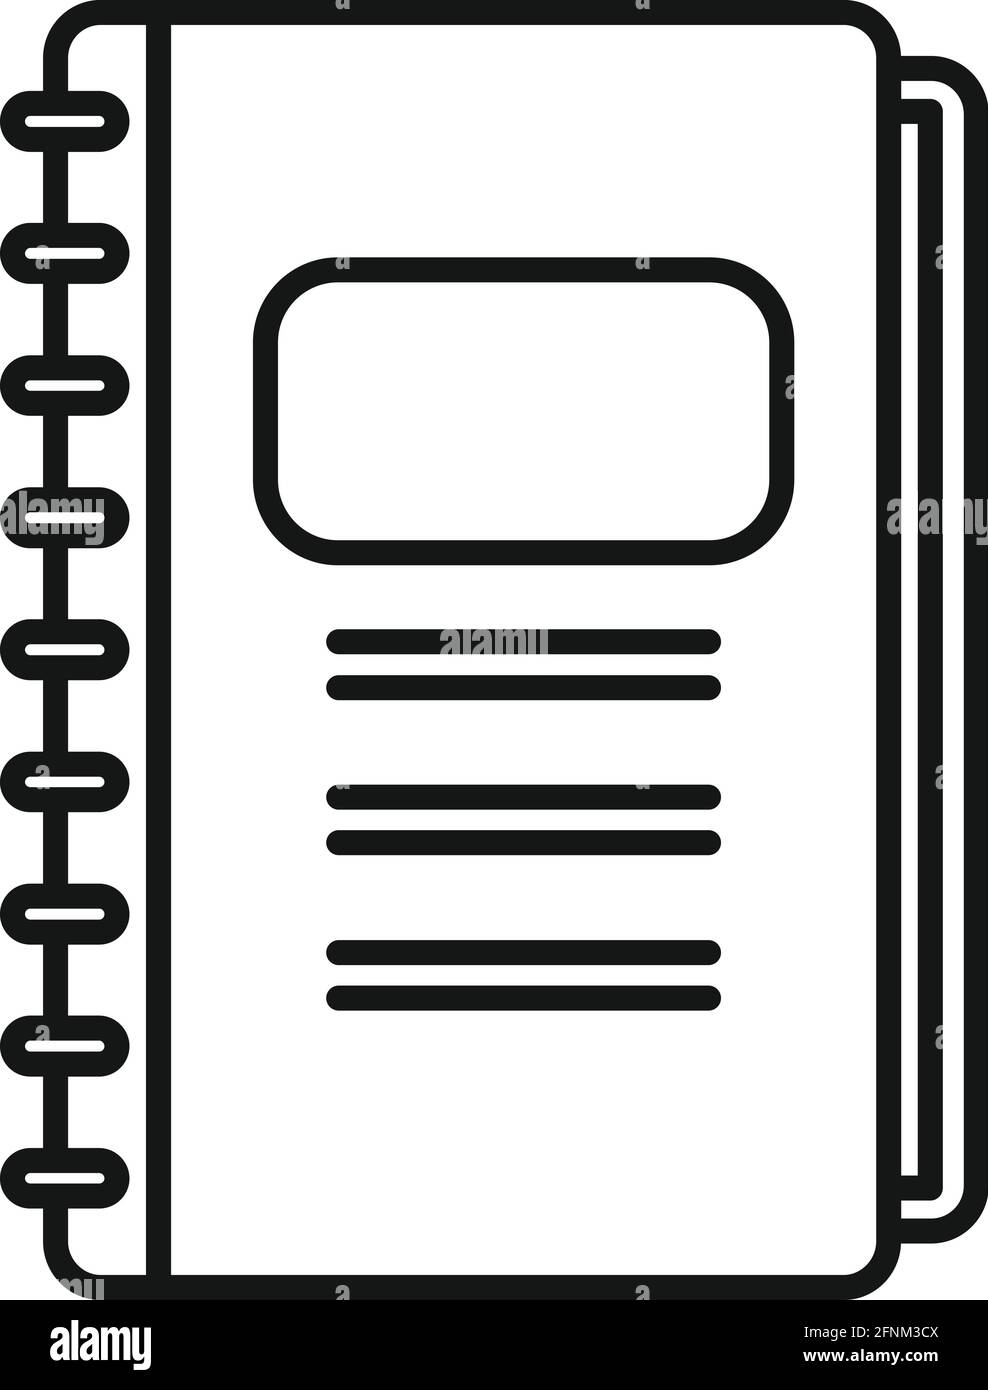 Syllabus daily notebook icon, outline style Stock Vector